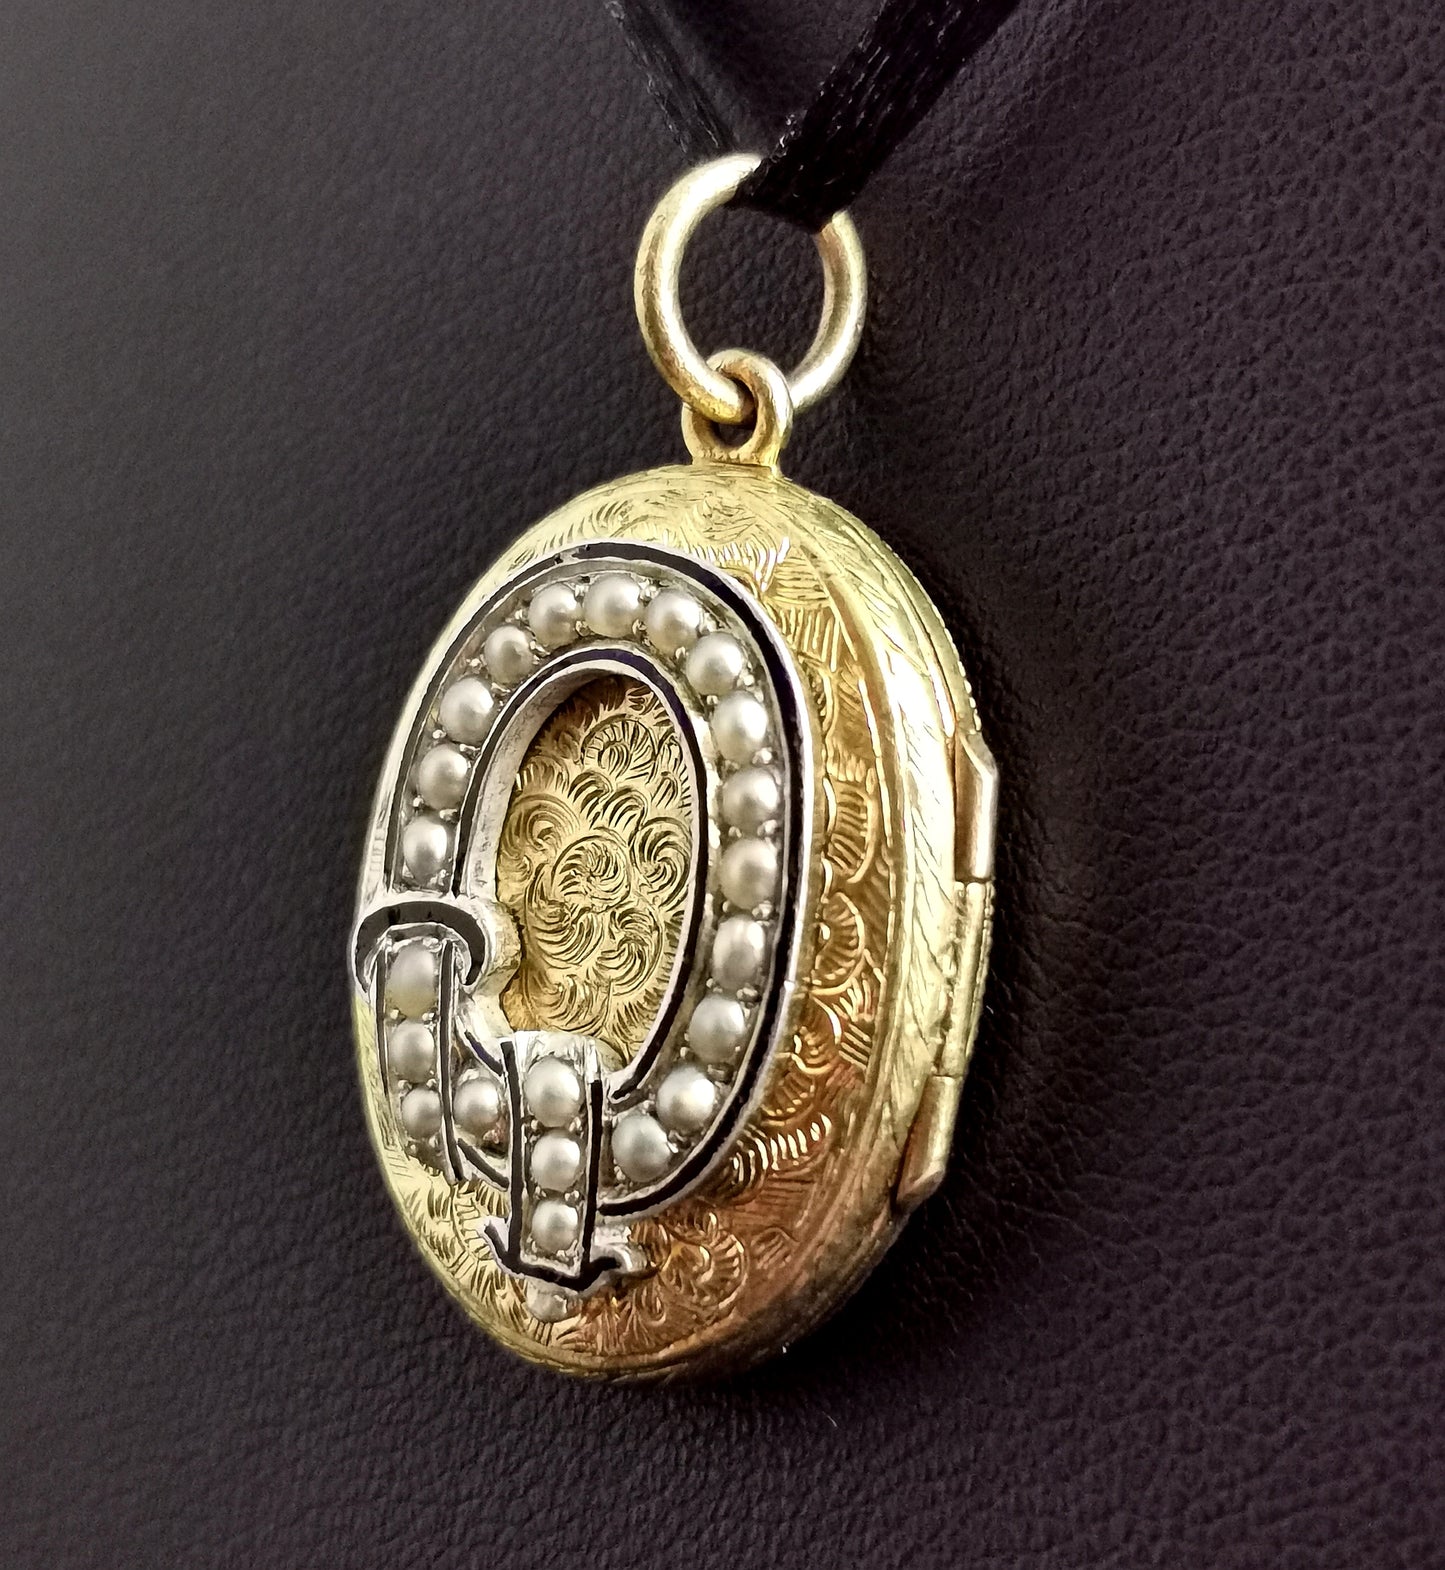 Antique Victorian mourning locket, 9ct gold, Pearl and Enamel buckle